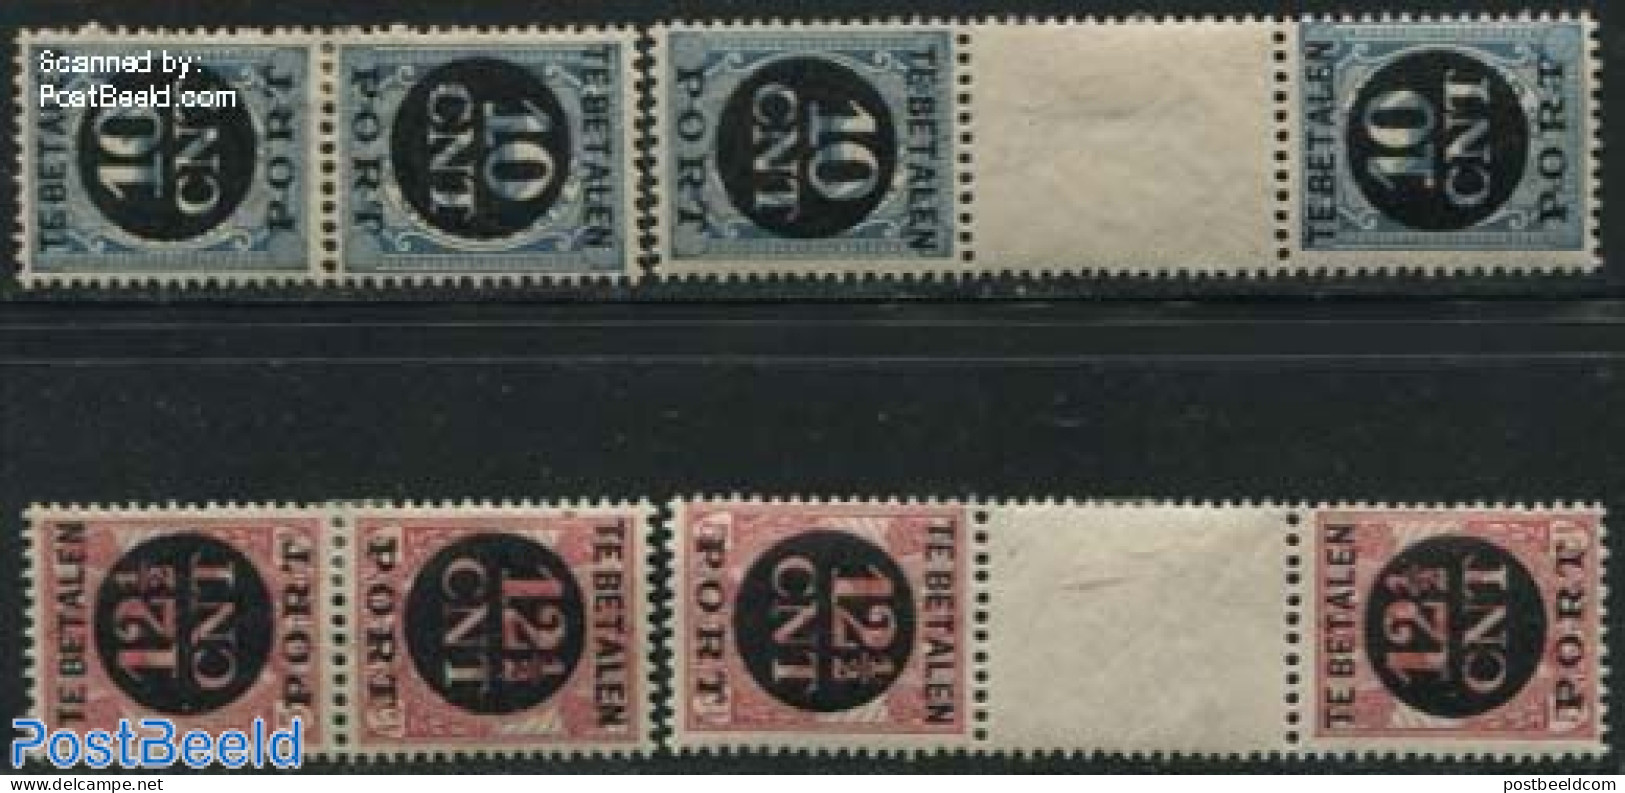 Netherlands 1924 Tete Beche 4 Pairs, Unused (hinged) - Strafportzegels